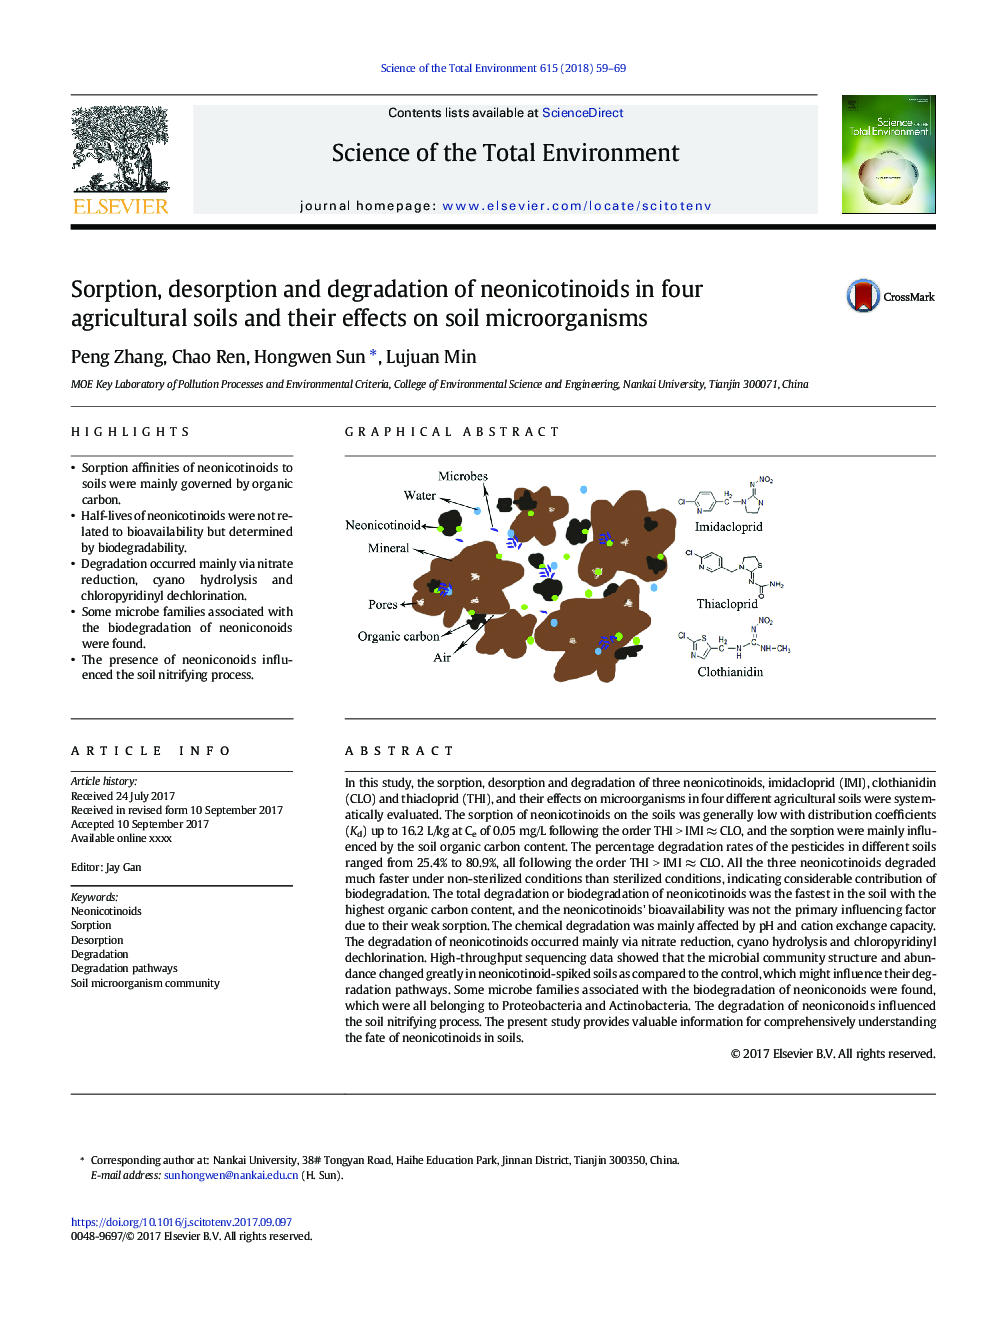 Sorption, desorption and degradation of neonicotinoids in four agricultural soils and their effects on soil microorganisms